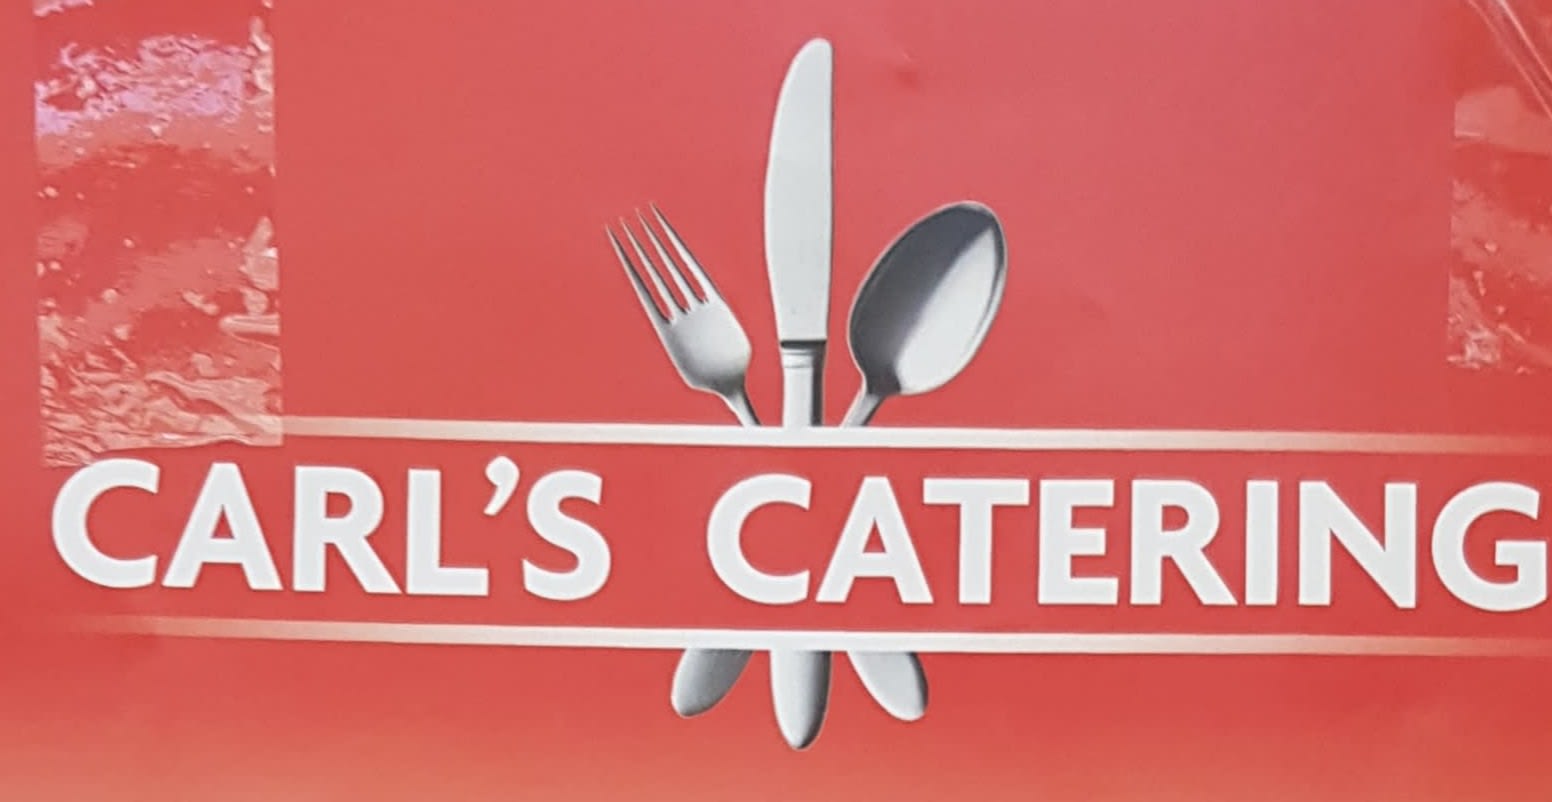 Carl's Catering